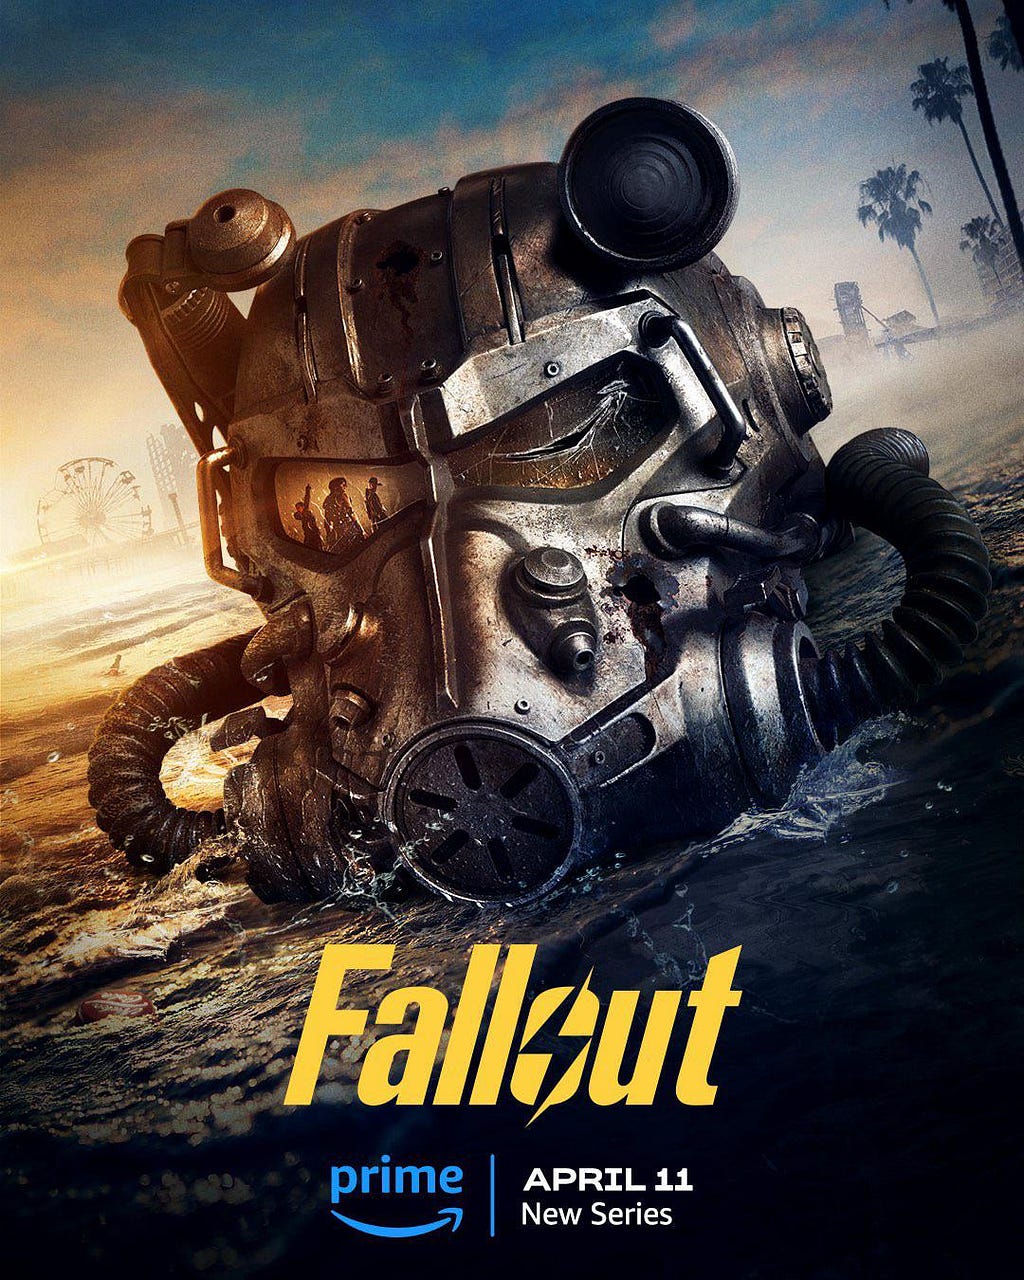 An official poster of the series showing a roughed up helmet of the Power Armour.